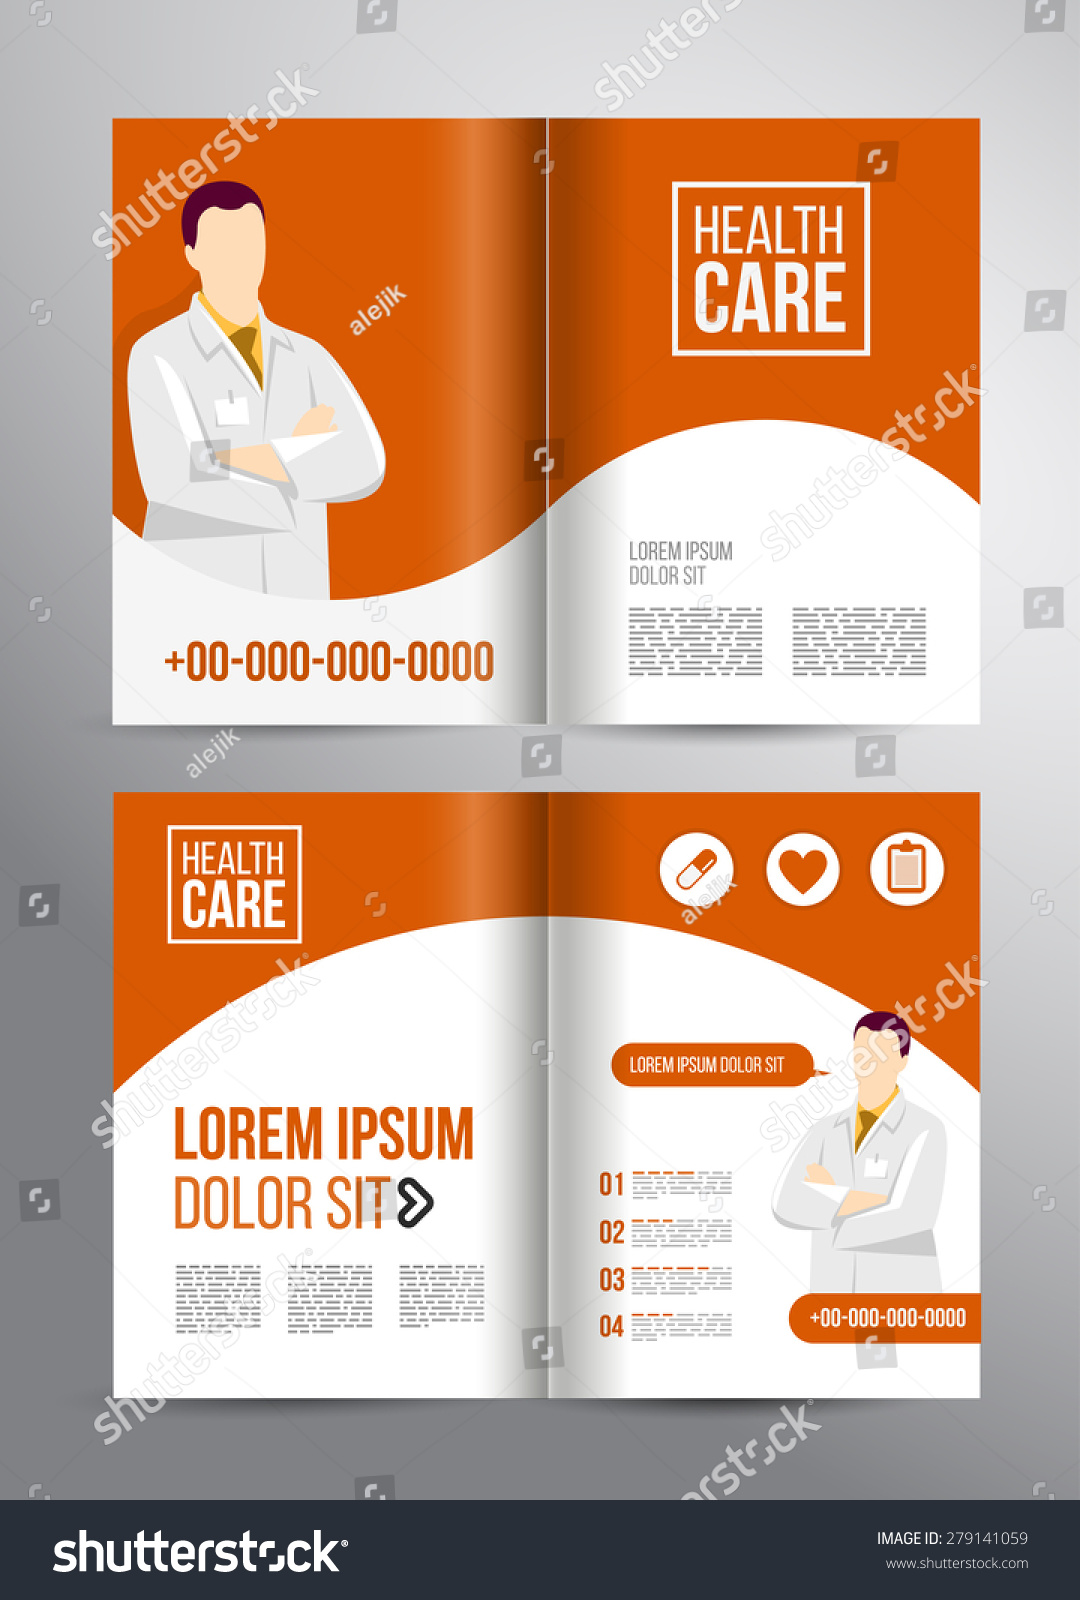 Vector health care brochure for clinic with doctors. Medical flyer design. #279141059